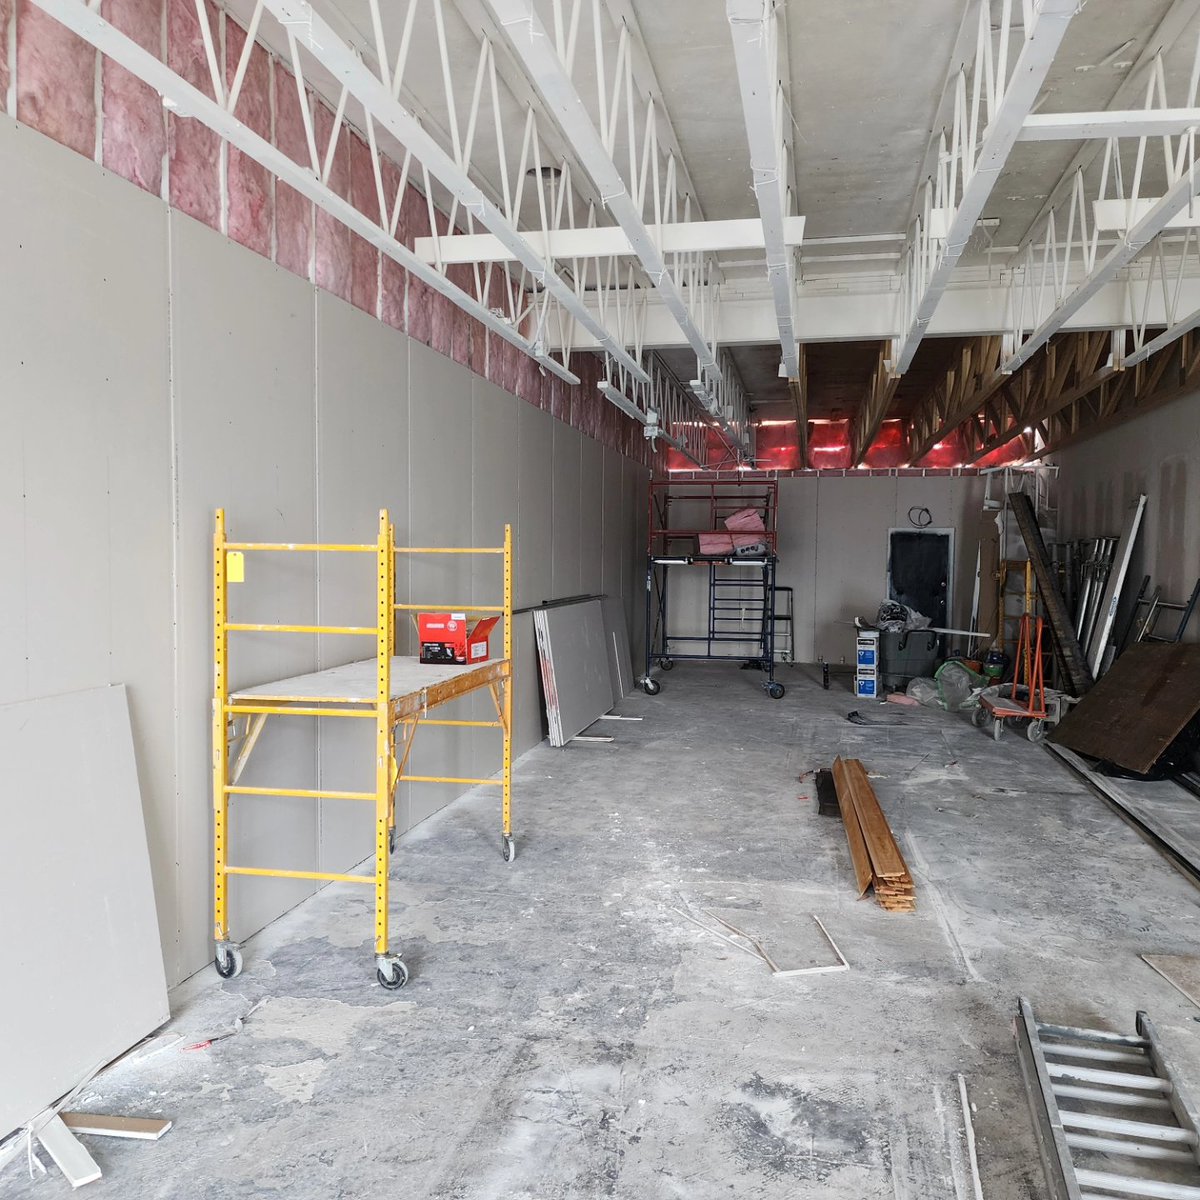 Insulation is in, and drywall is 80% complete.. getting closer all the time! Starting to get excited!
Cheers!
Team North Sea Fish Market Willow Park 
 #yycfood #yyceats #yyc #yycfoodie #calgary #yycliving #yycnow #calgaryfood #calgaryeats #yycfoodies #calgaryfoodie #yyc